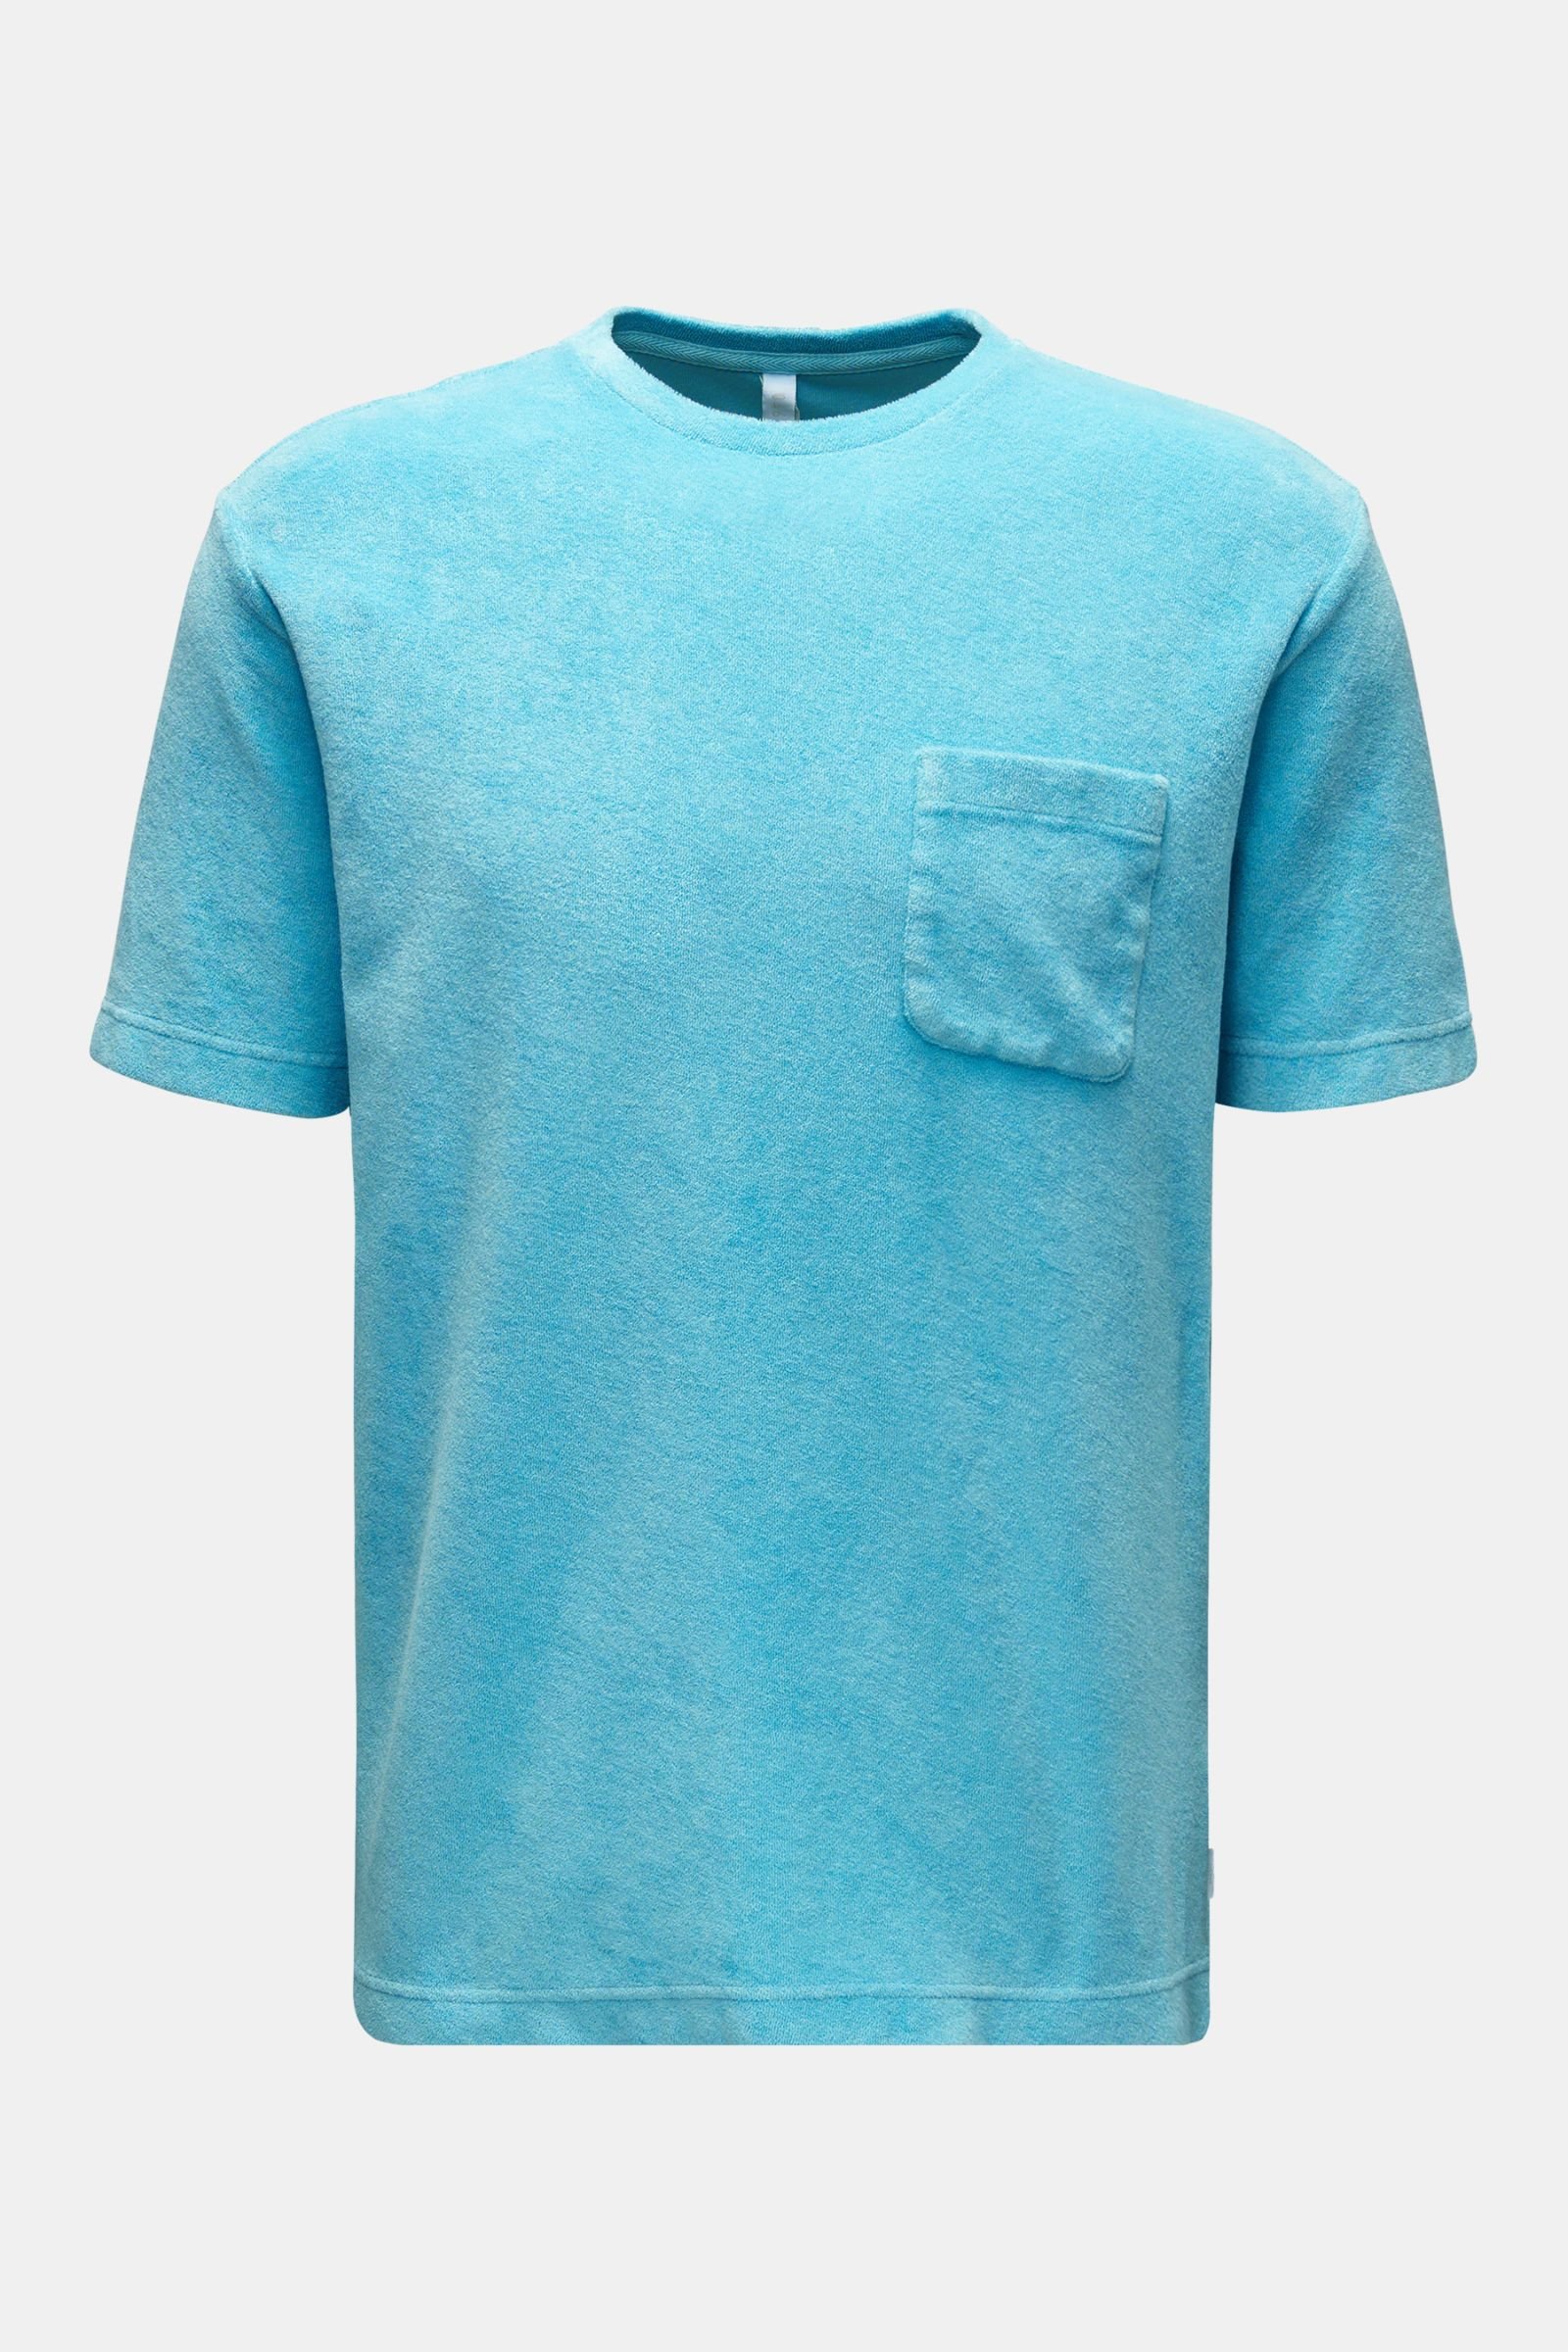 Crew neck terry T-shirt turquoise 